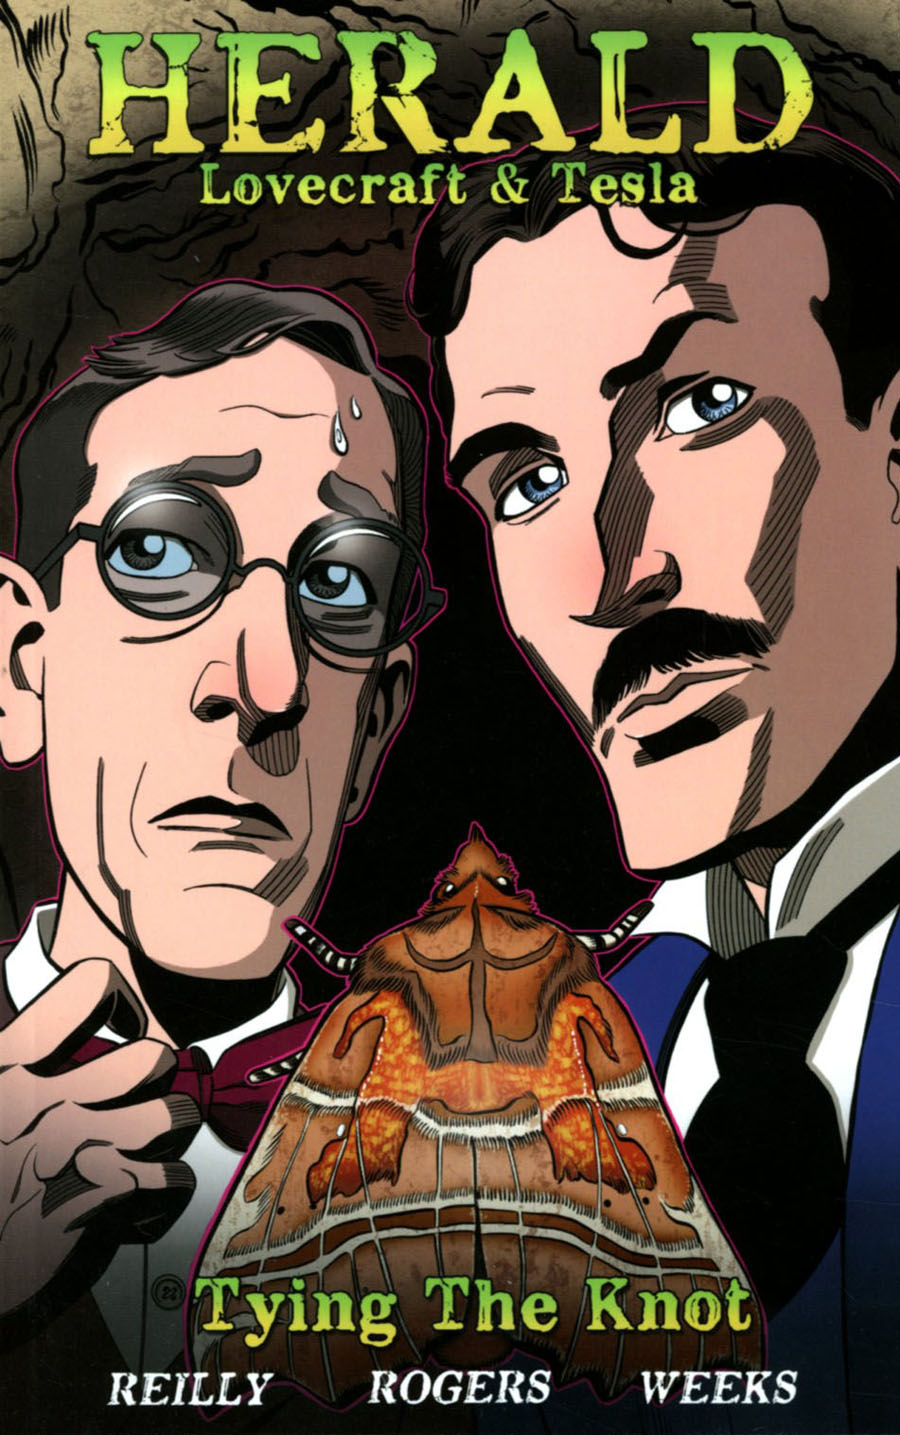 Herald Lovecraft & Tesla Vol 3 Tying The Knot TP